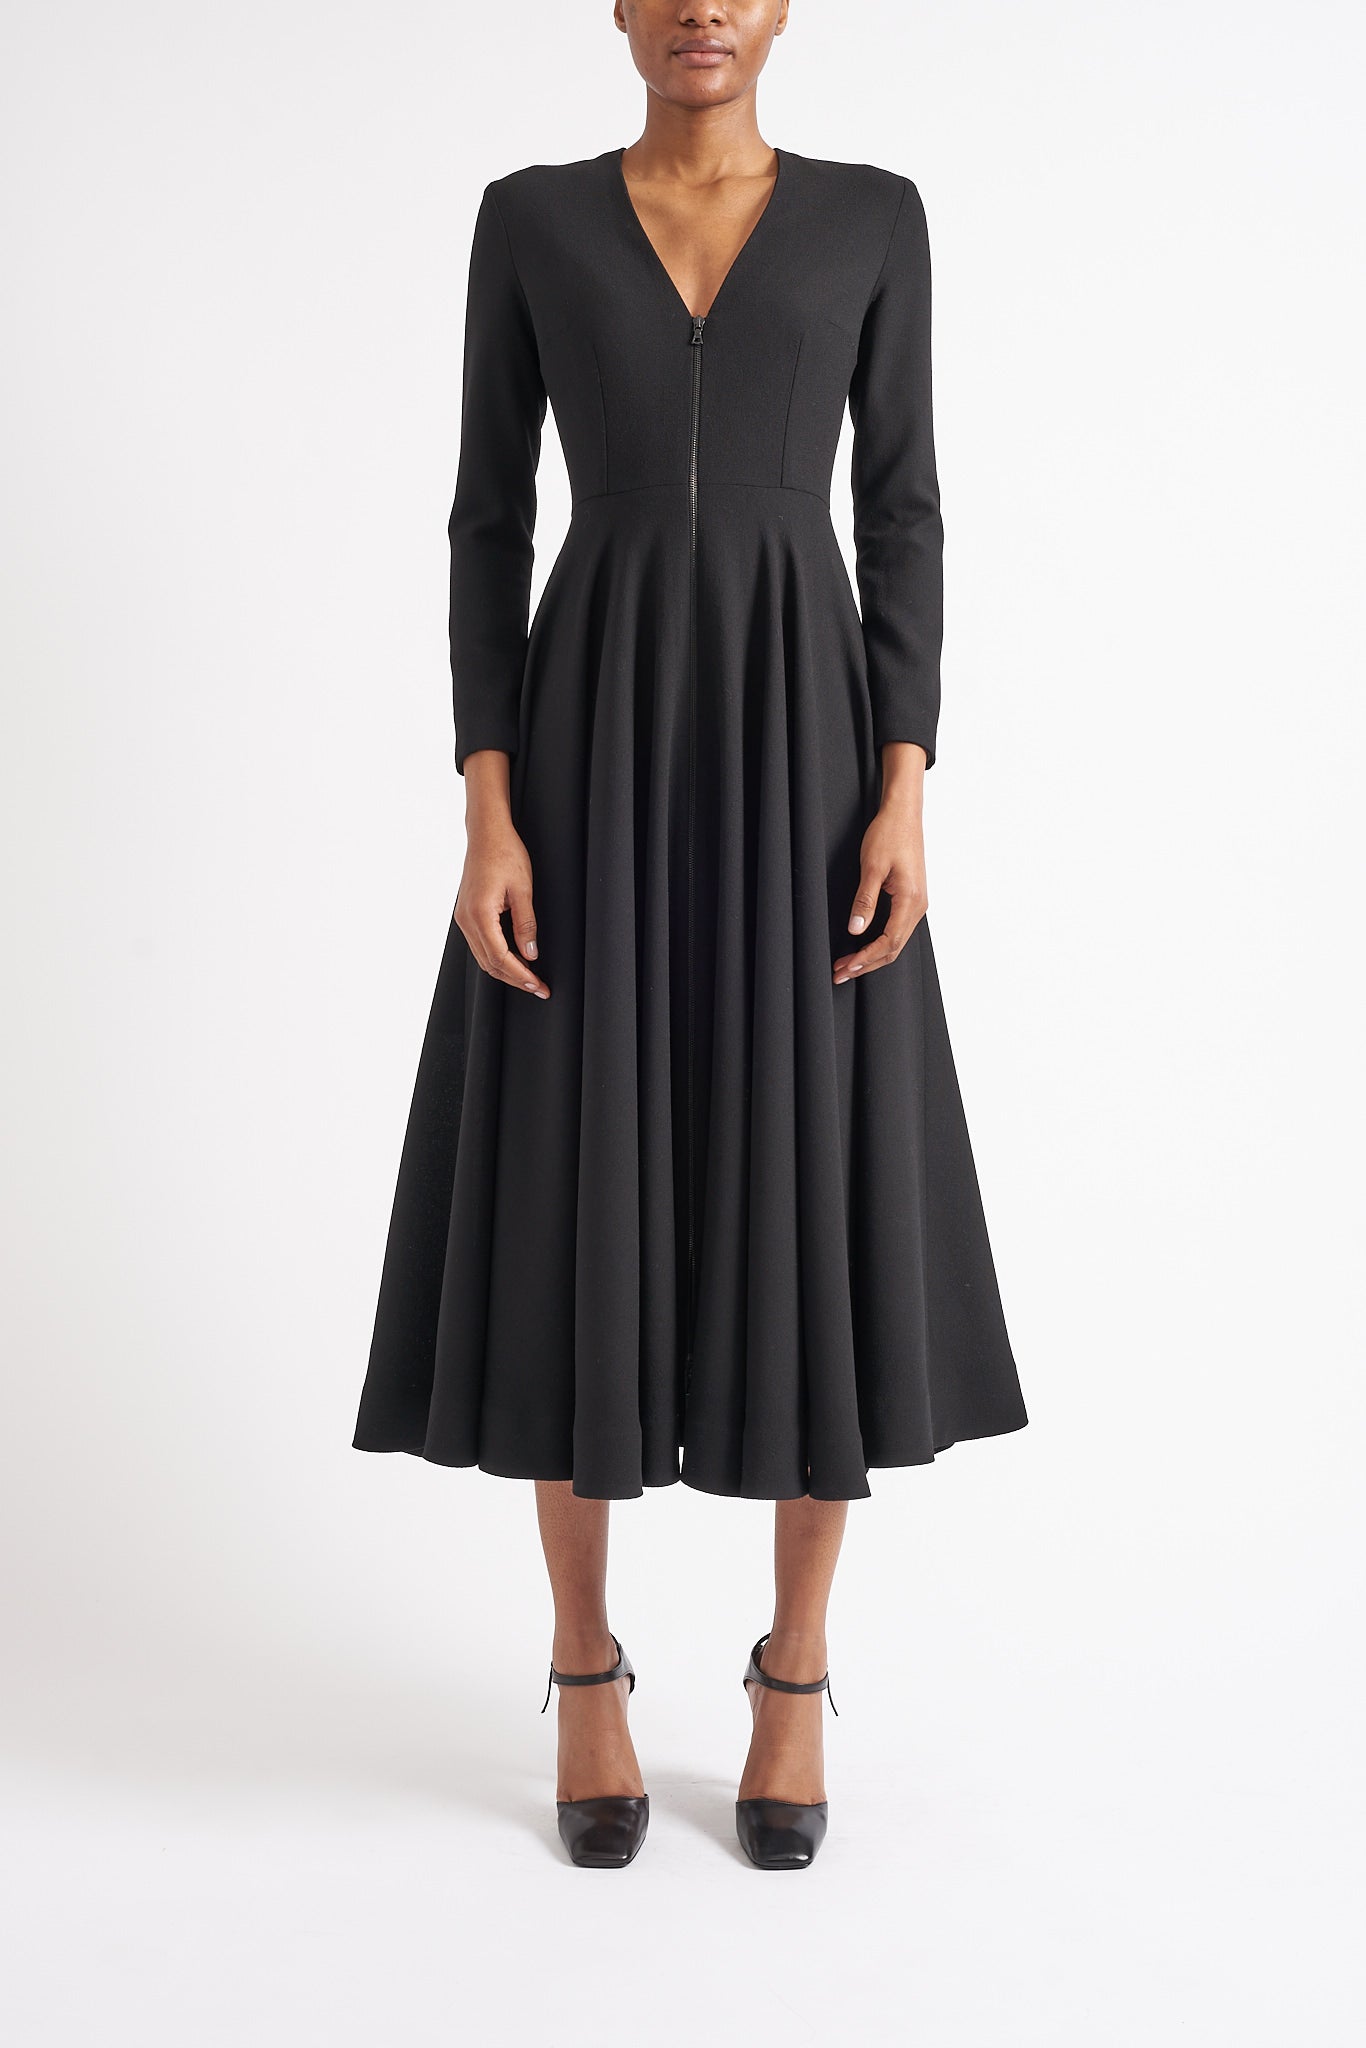 CASS BLACK SUSTAINABLY SOURCED CADY DRESS